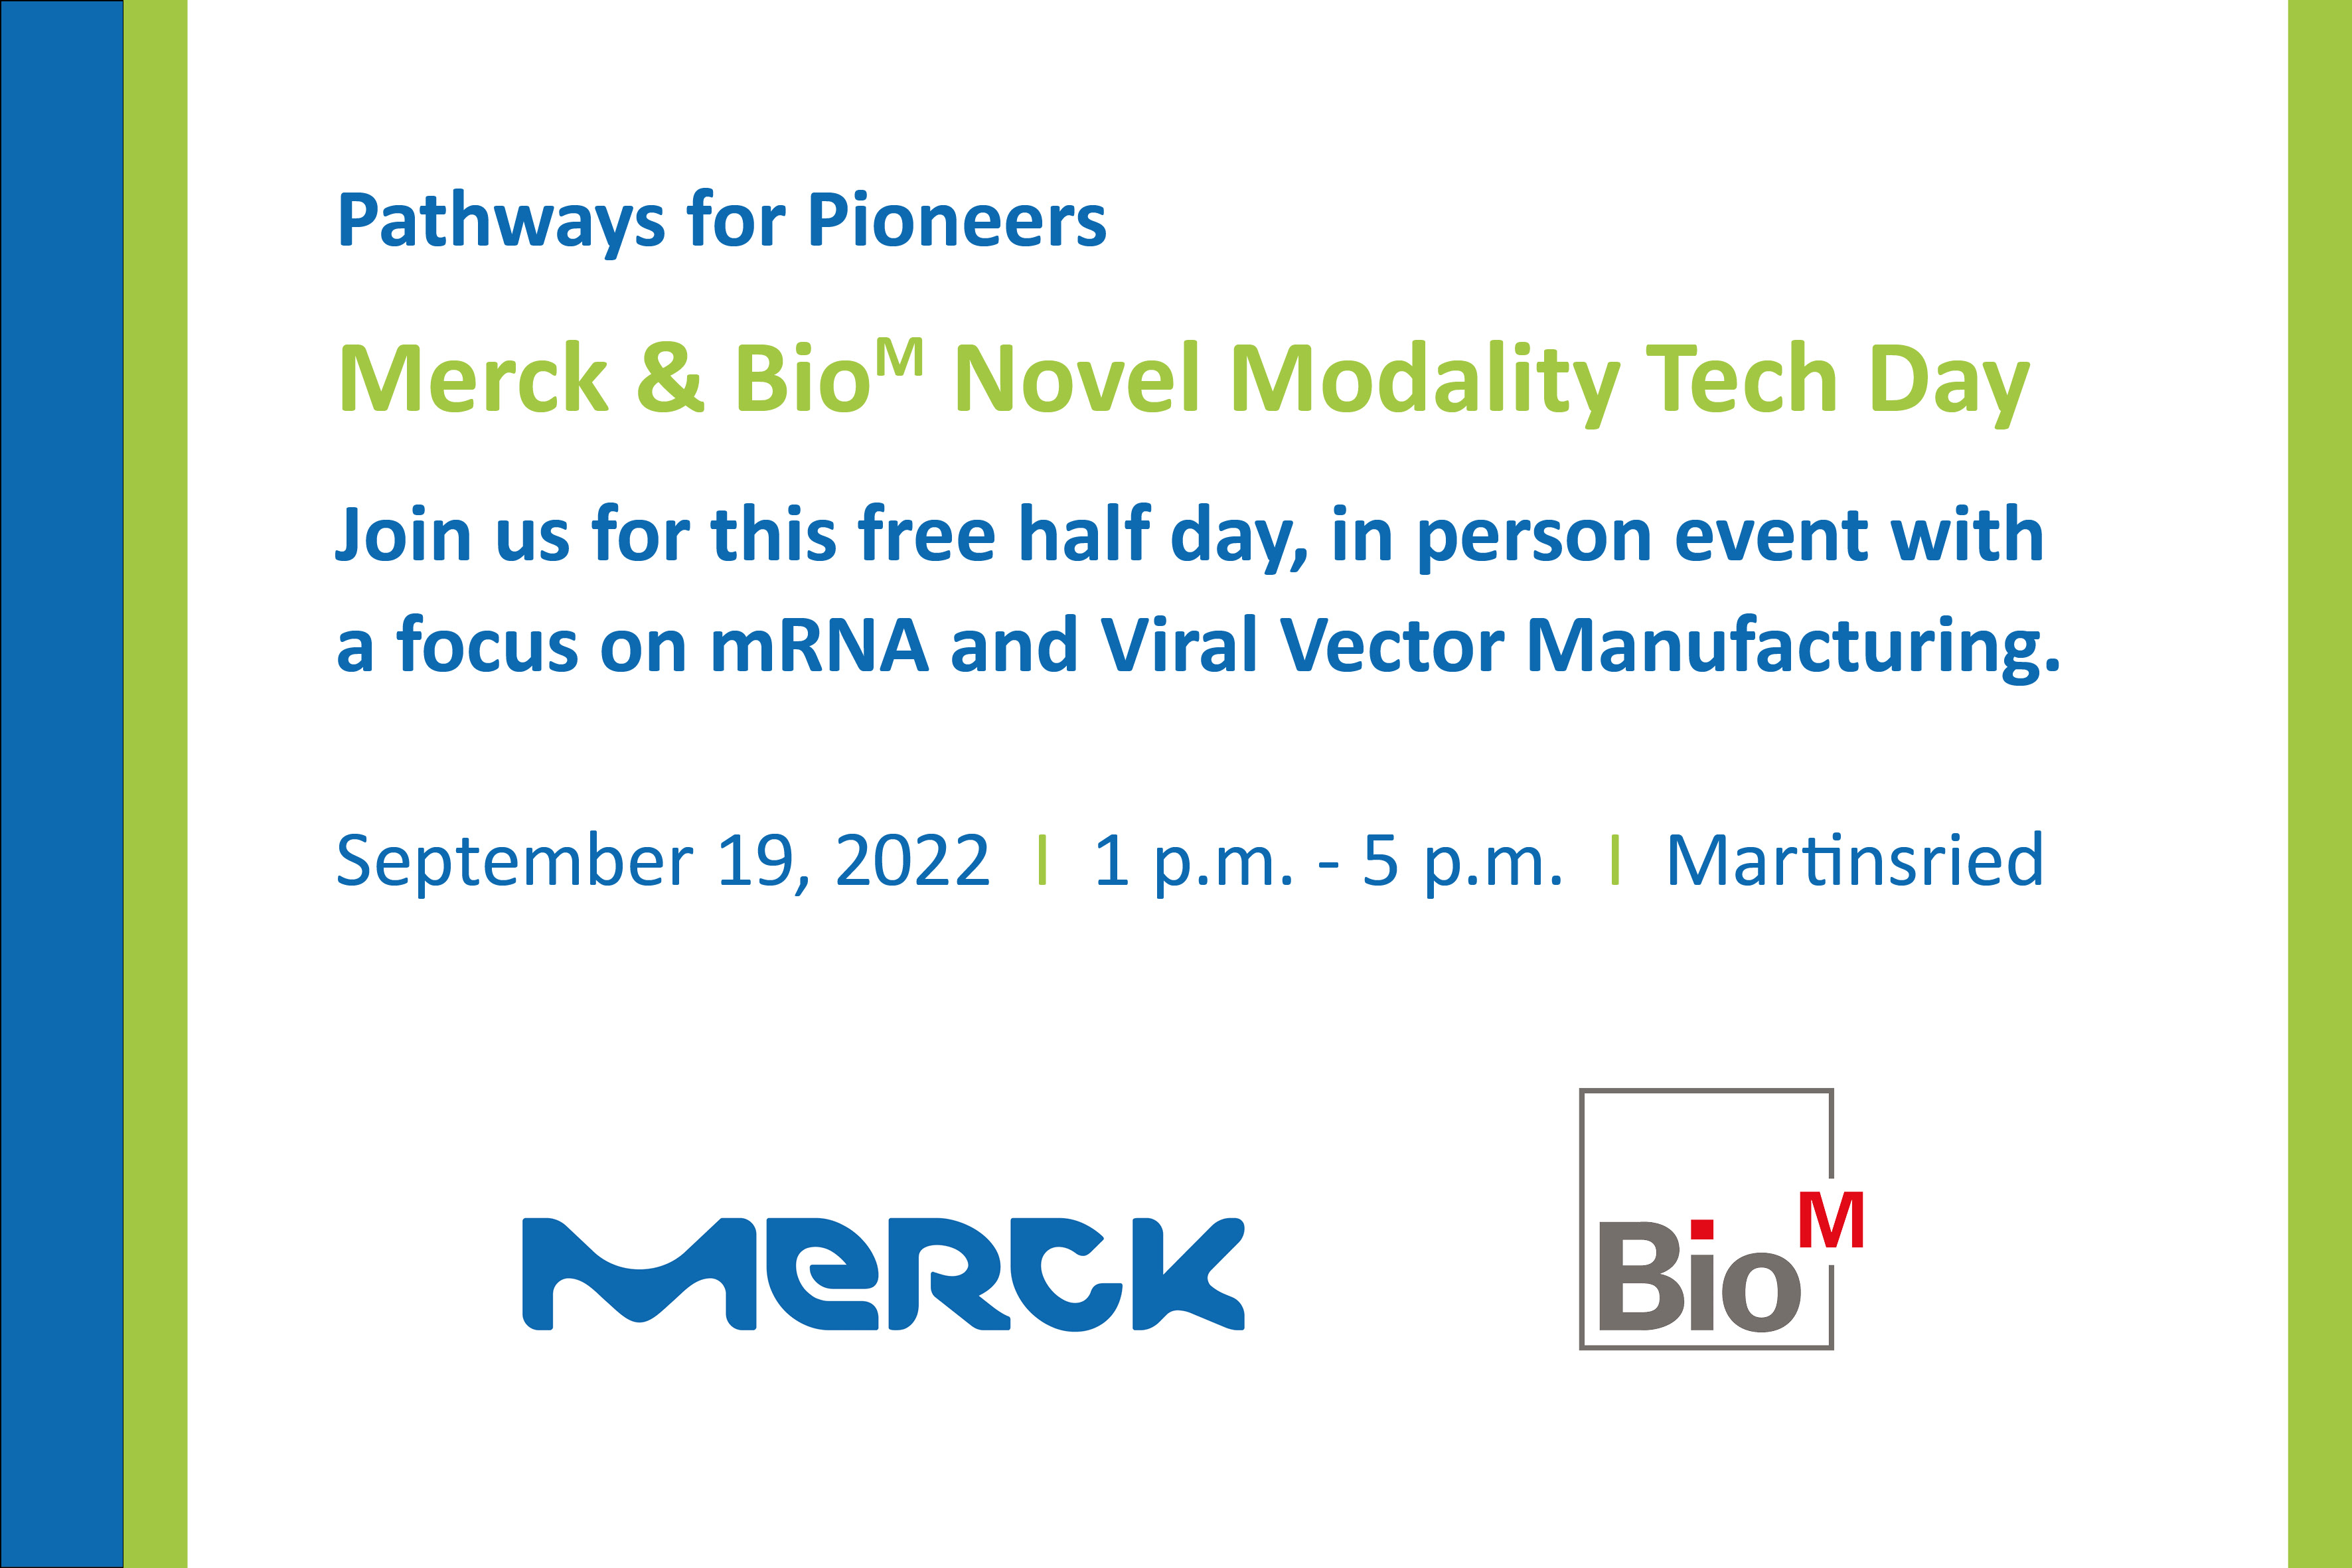 Join us for this free half day, in-person event in the premises at BioM with a focus on mRNA and Viral Vector Manufacturing. Look forward to many exciting presentations from experts in their field.